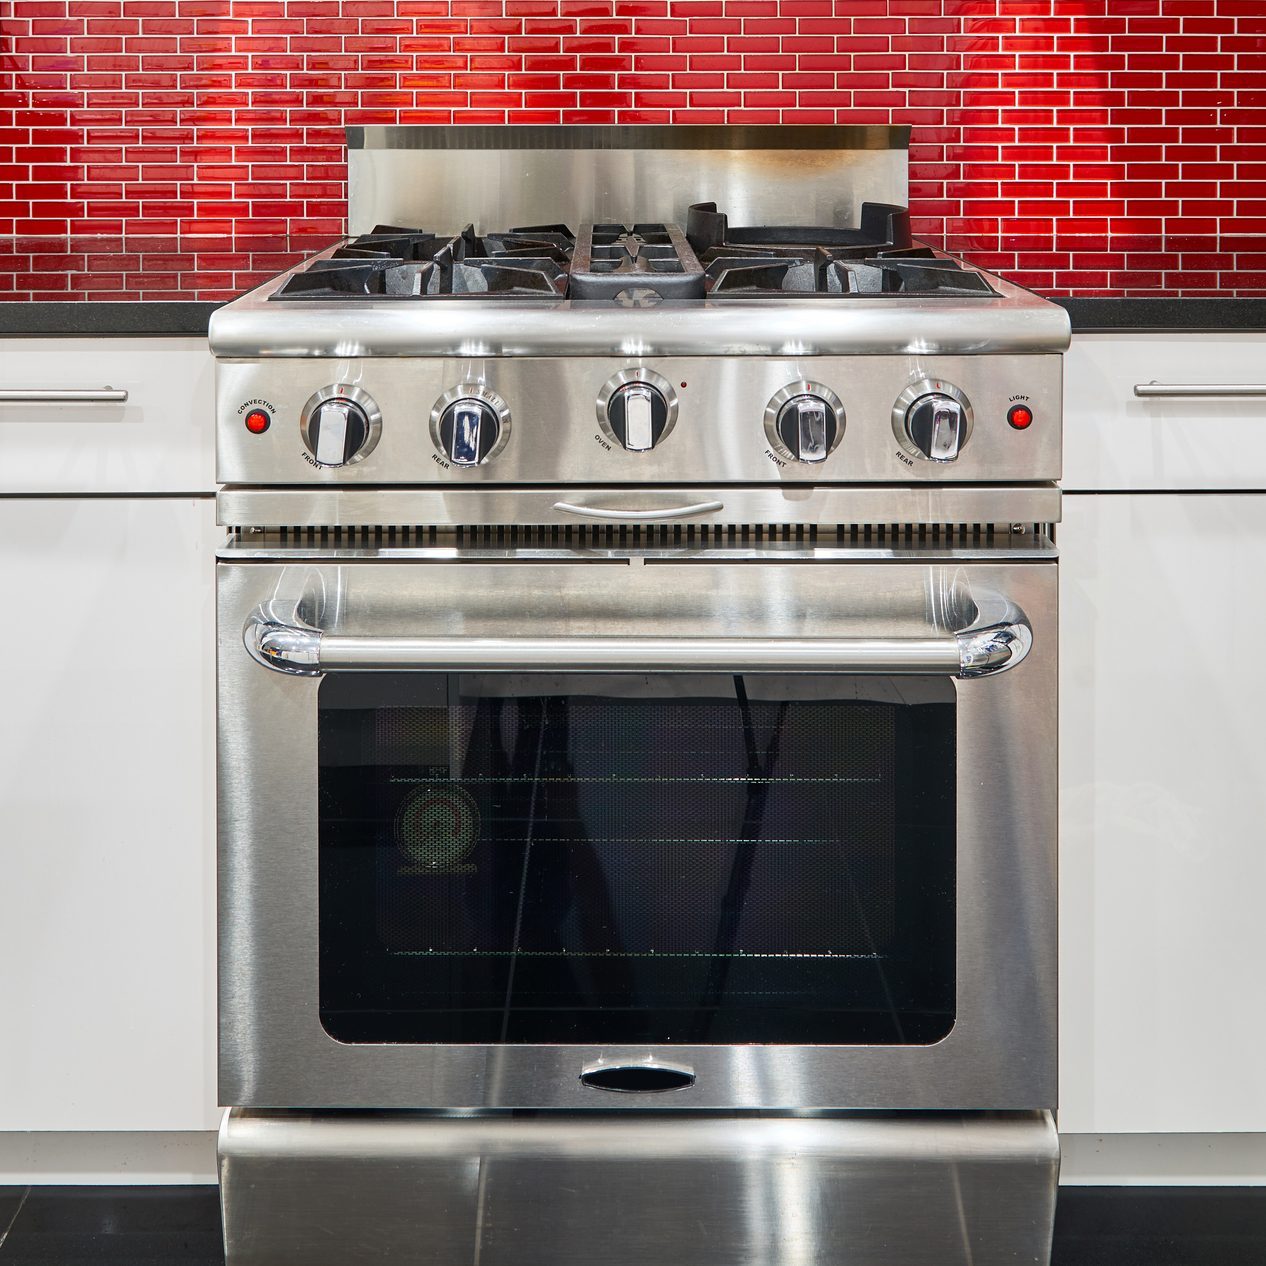 Why You Shouldn't Use Your Oven's Self-Cleaning Feature